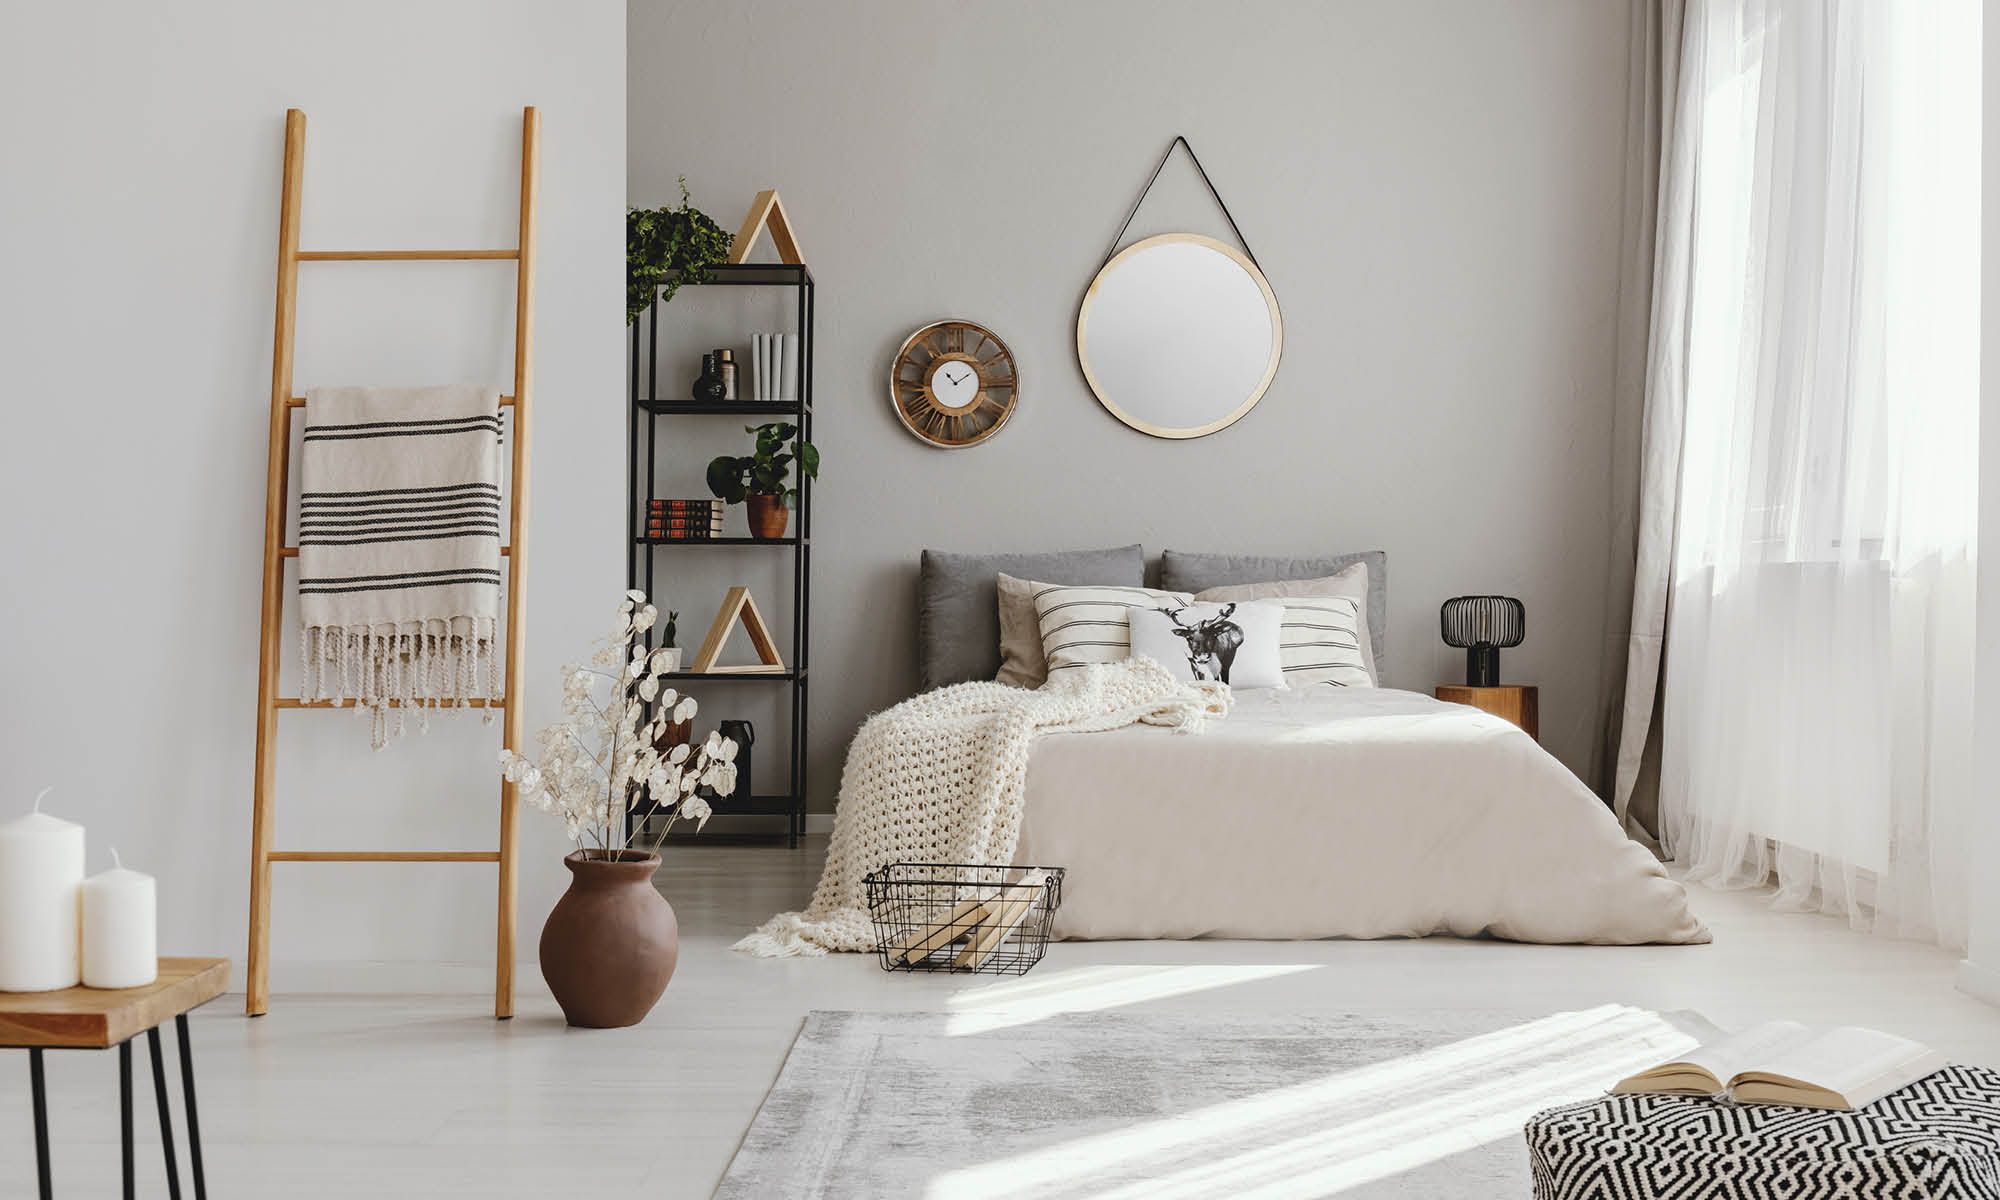 Modern minimalist bedroom with natural light, neutral tones, and decorative shelving.